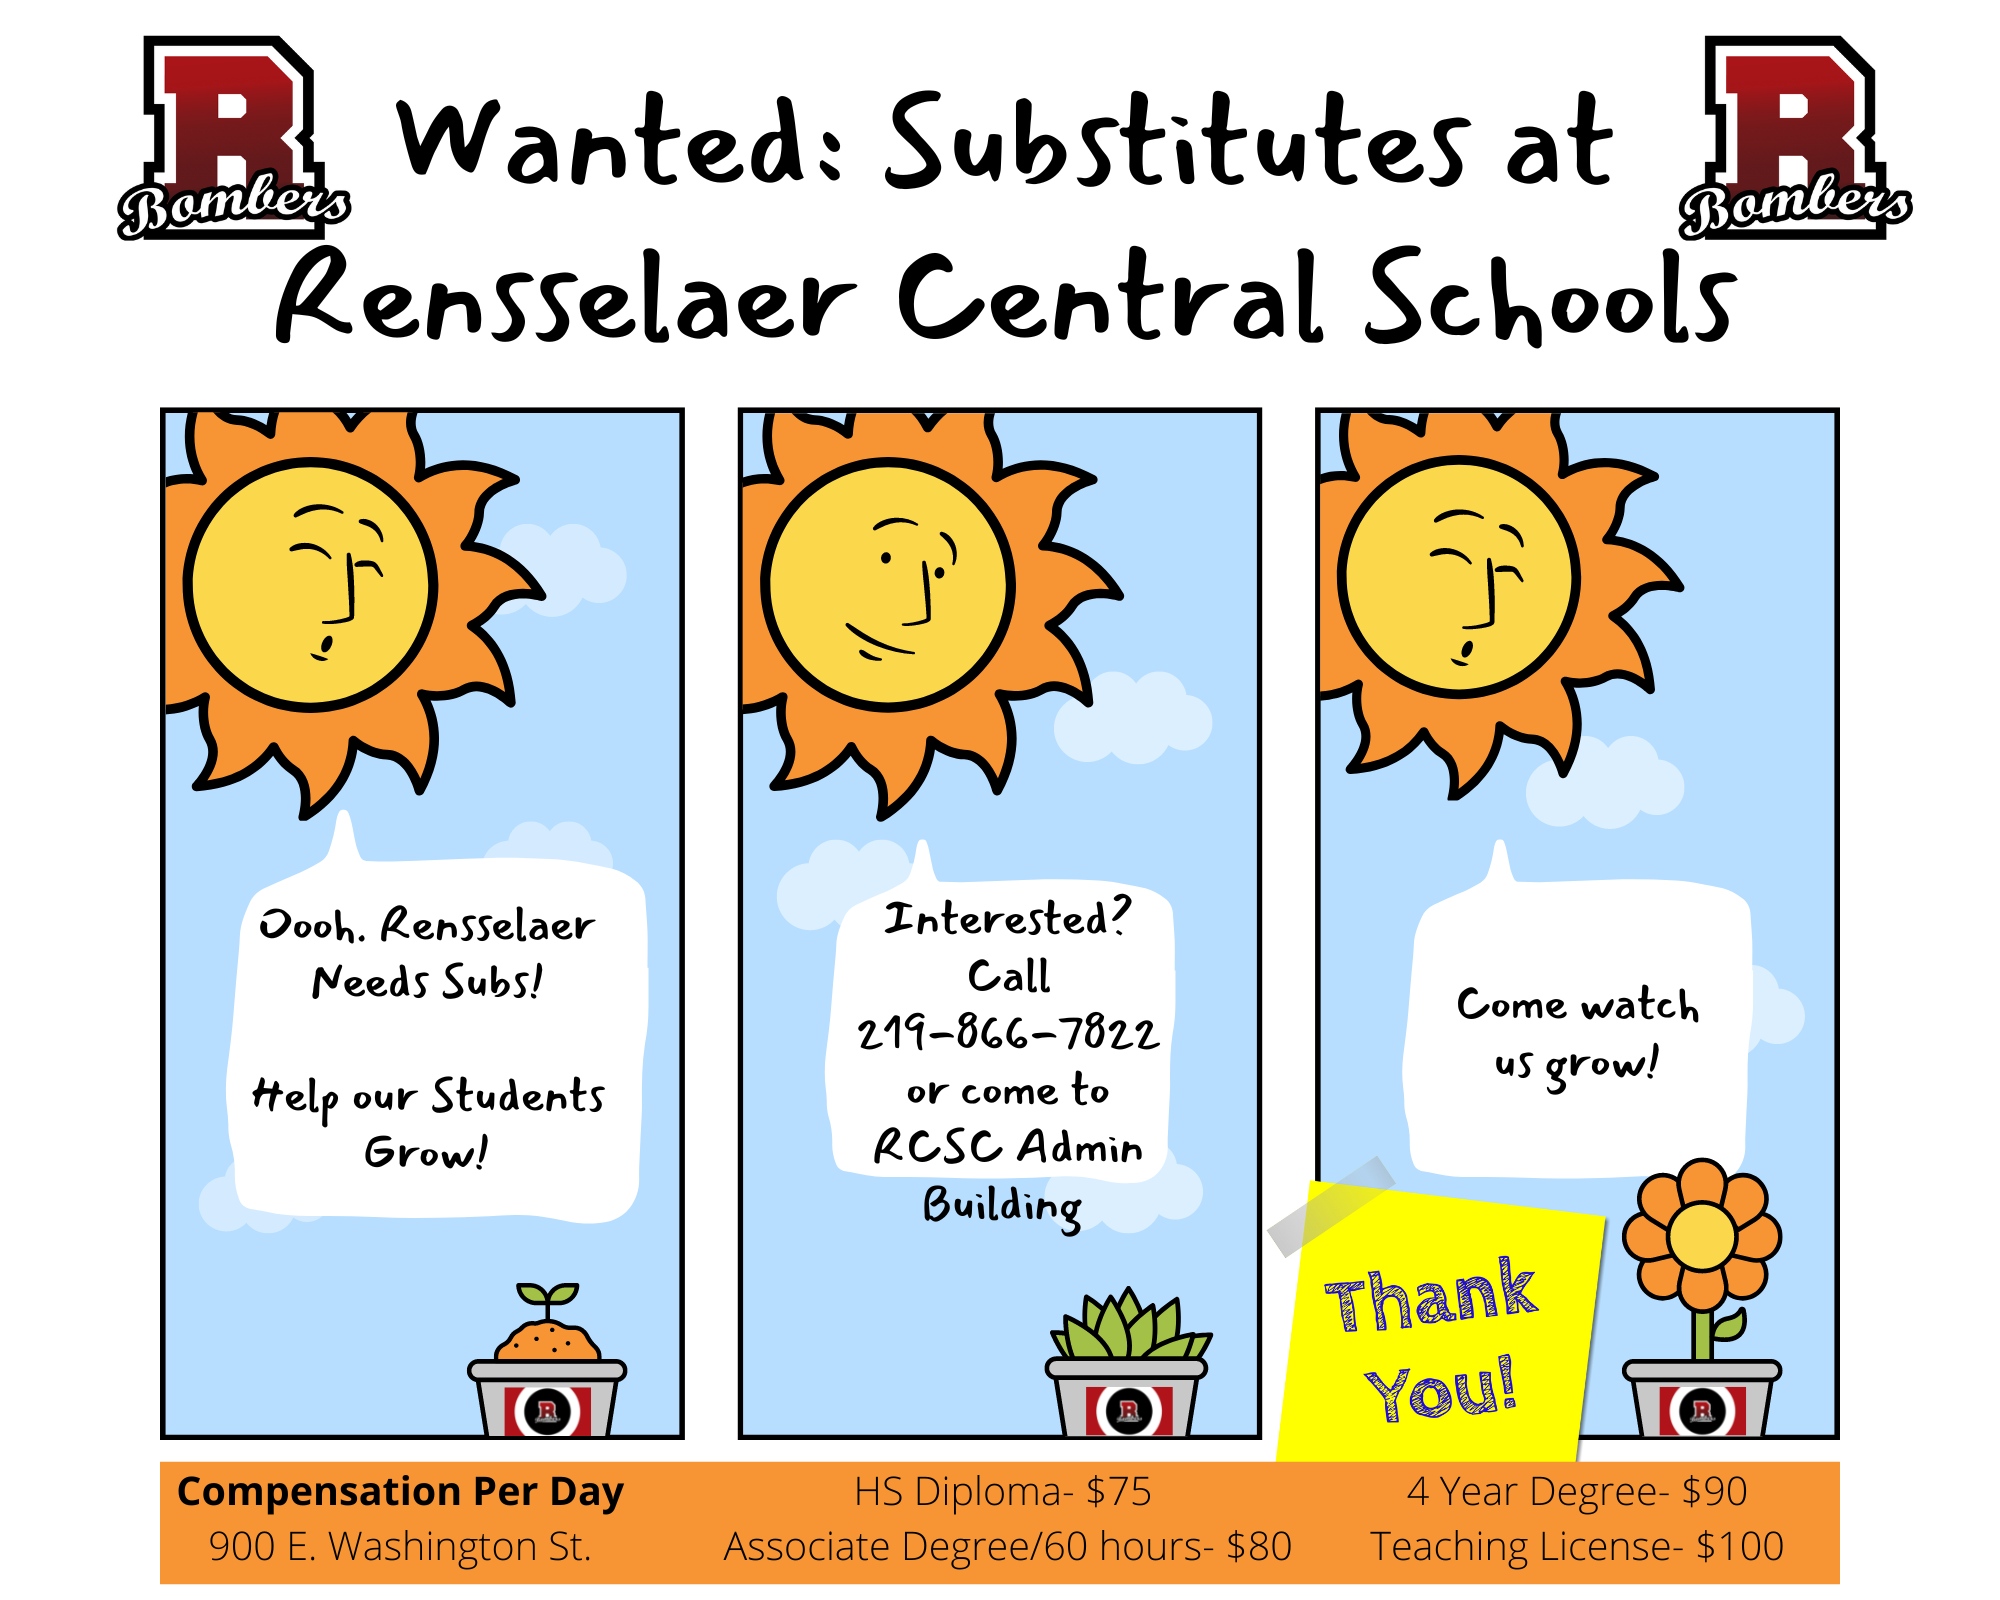 Wanted Substitutes at Rensselaer Central Schools